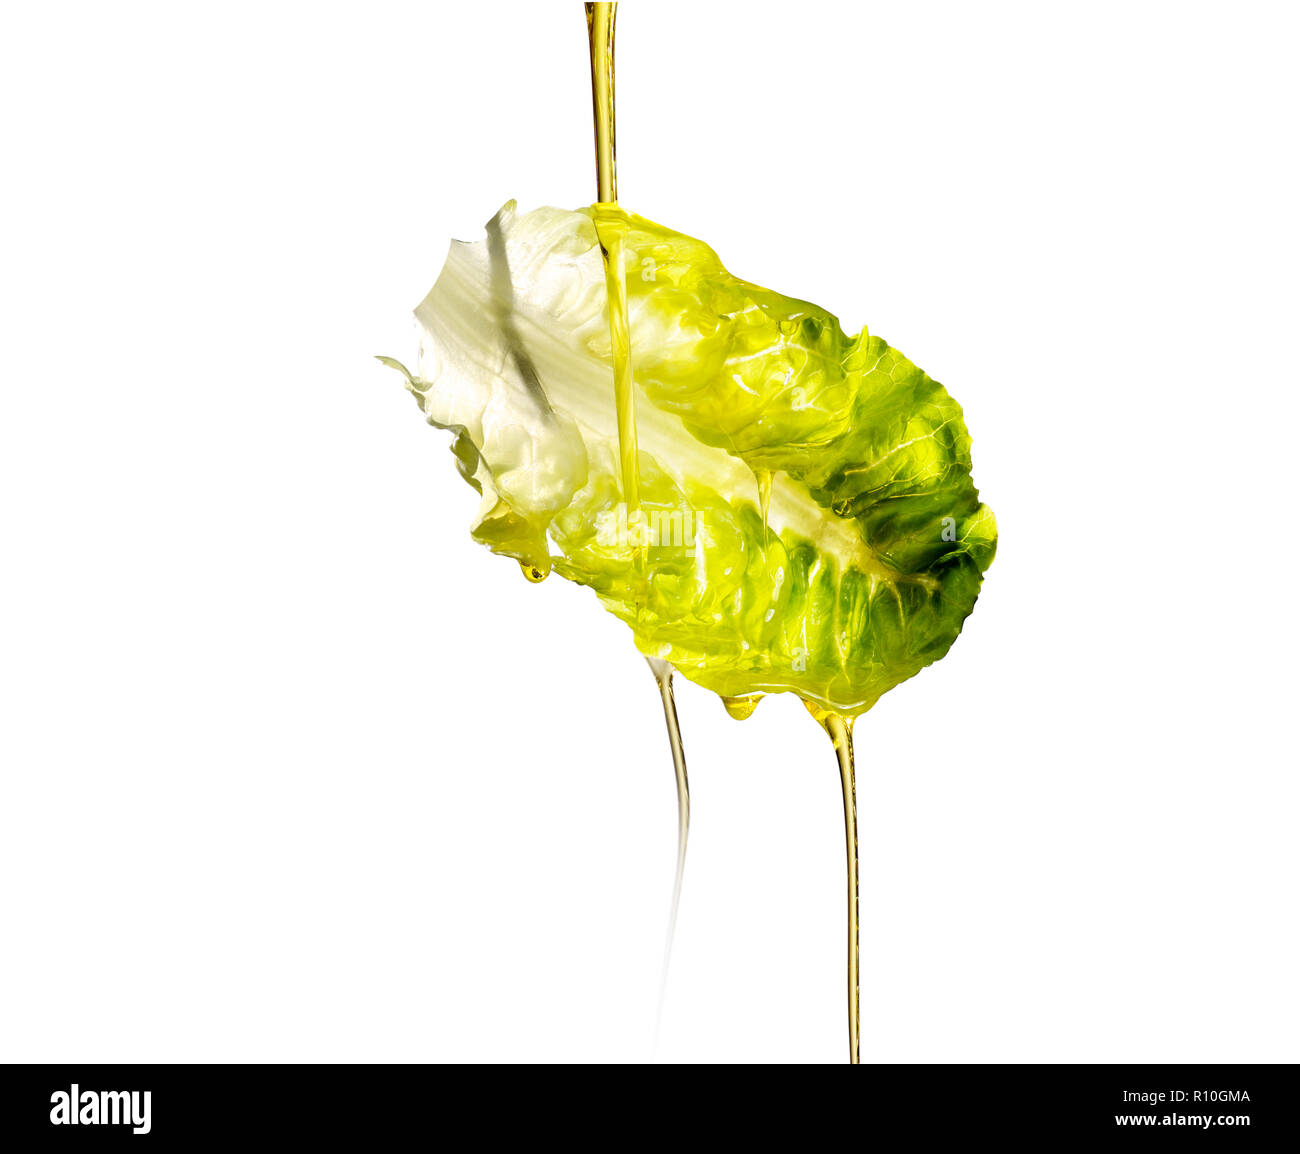 Oil pouring on floating lettuce leaf, white background Stock Photo